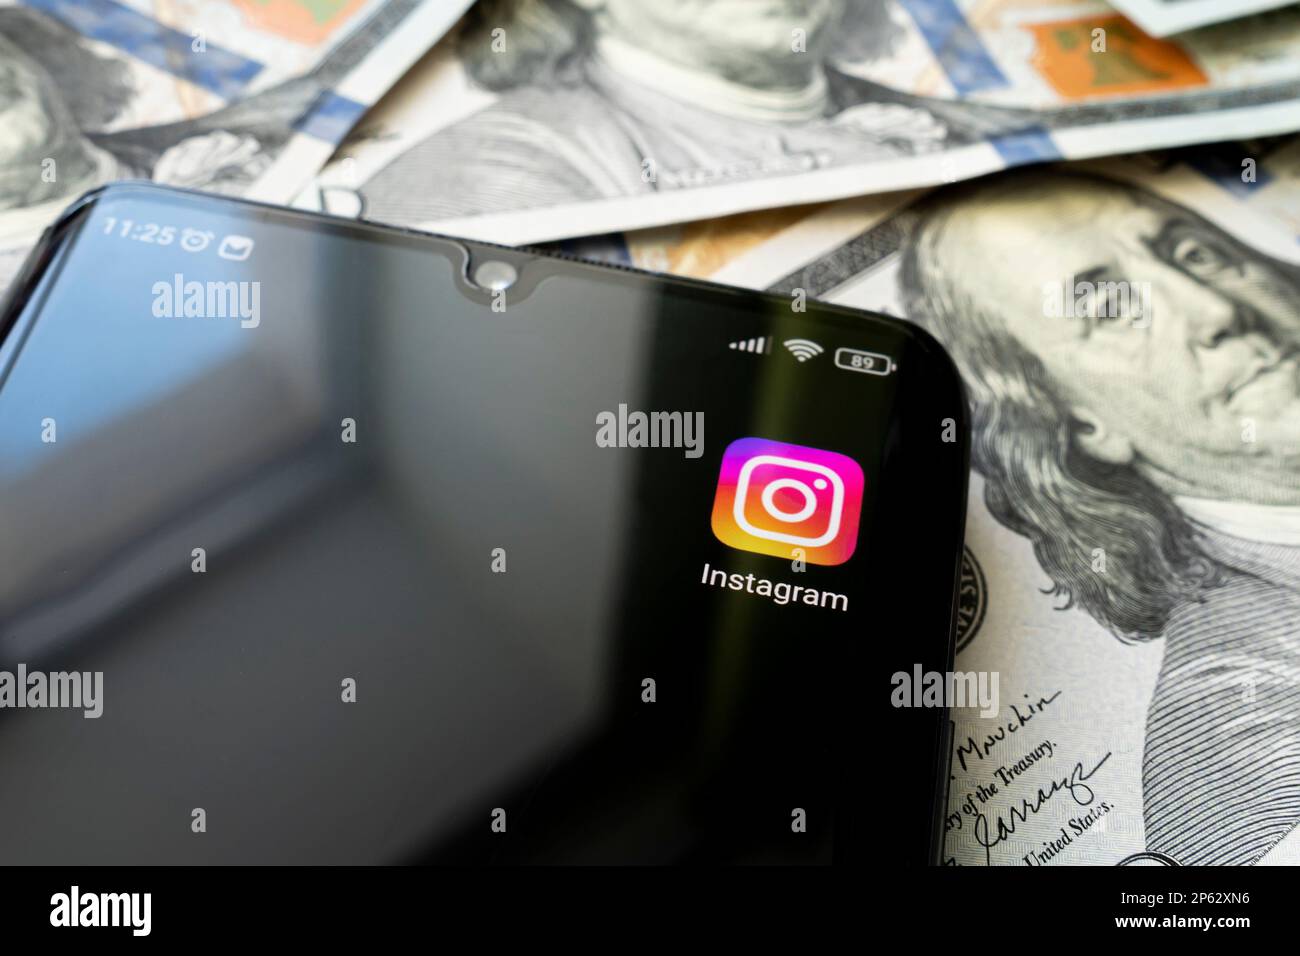 Smartphone screen with Instagram app and lot of hundred dollar bills. Business and social networking concept. the application icon on the black screen Stock Photo